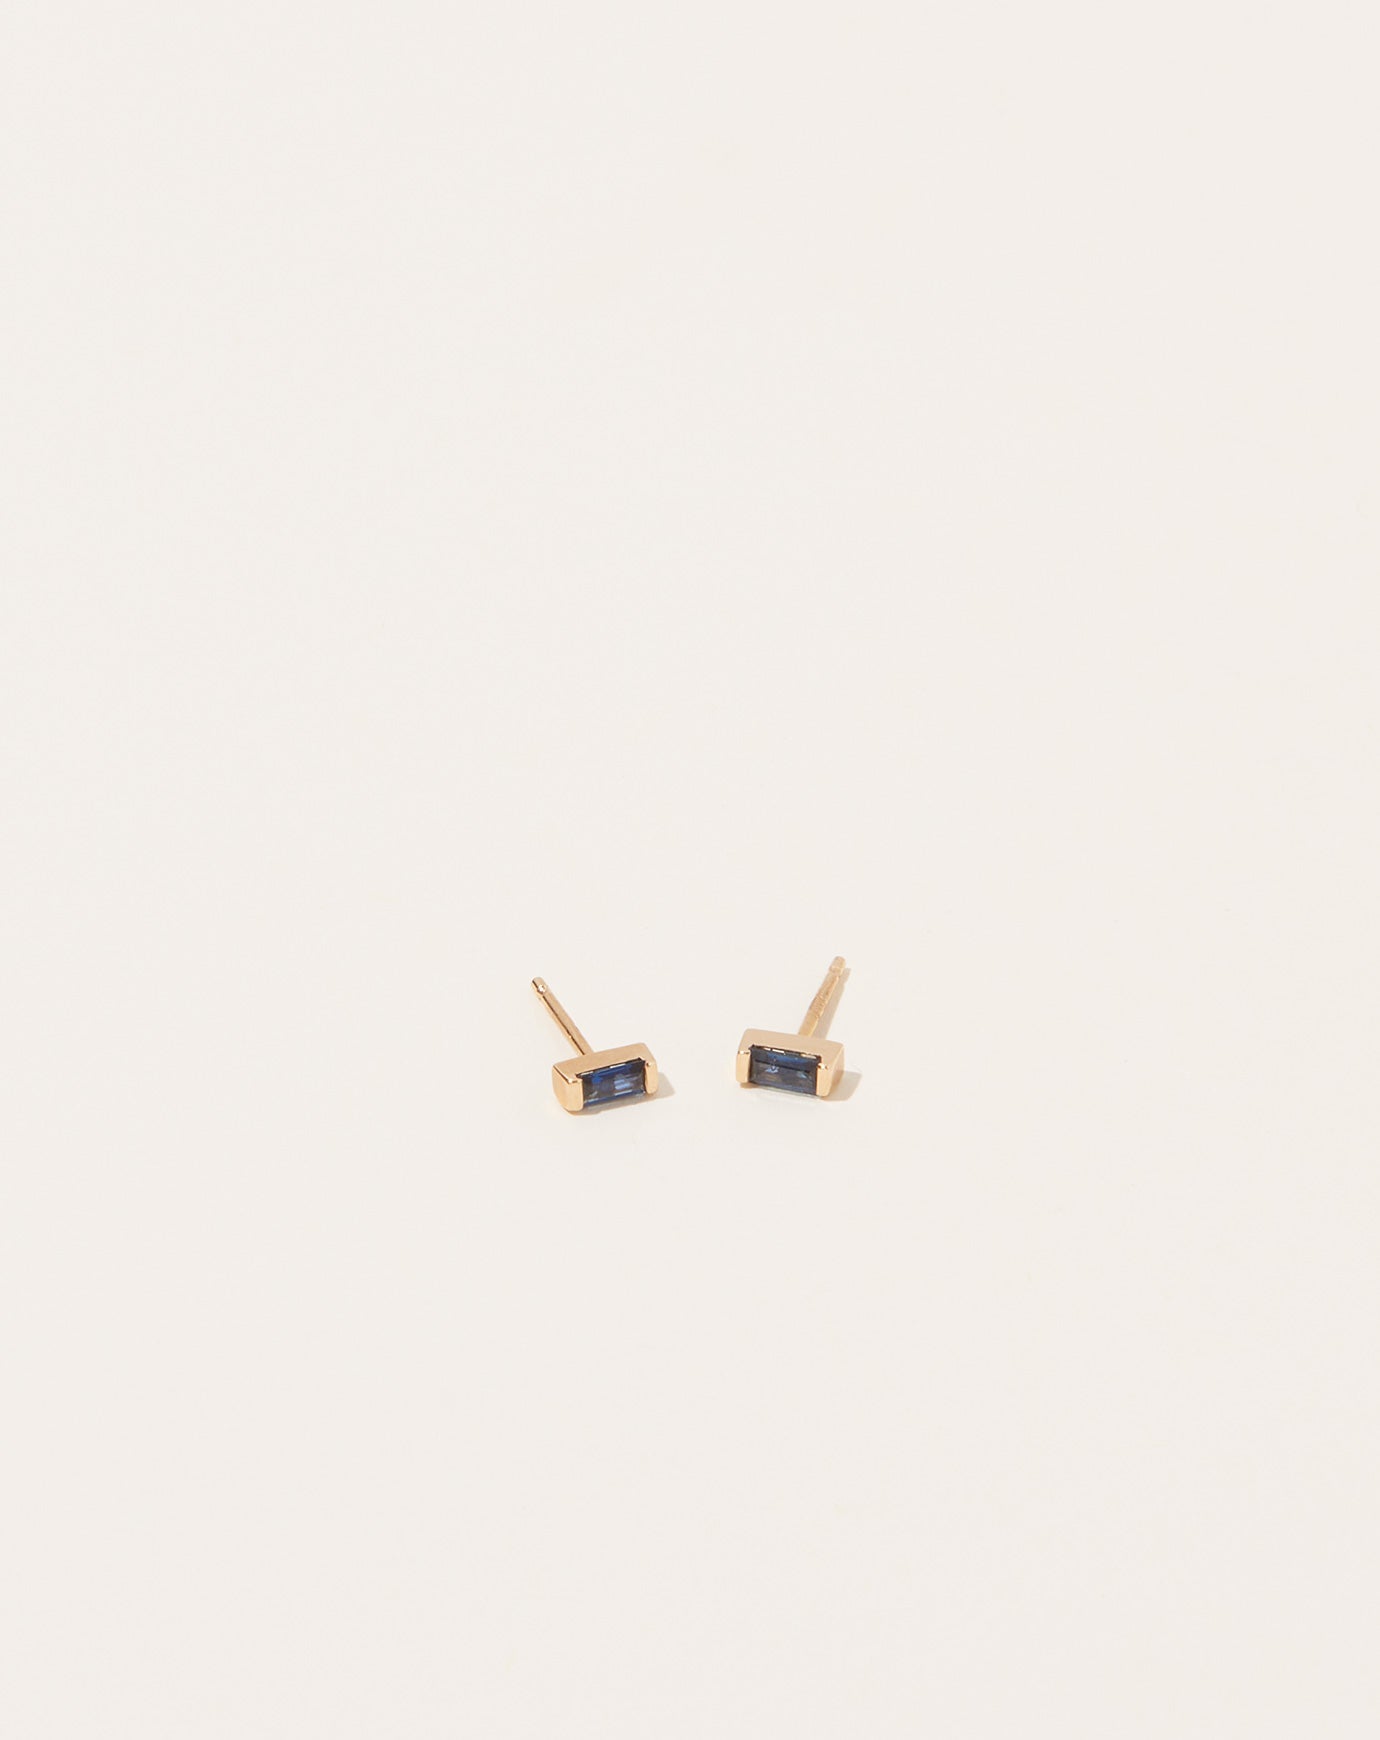 Selin Kent Galana Studs with Sapphires in 14k Yellow Gold